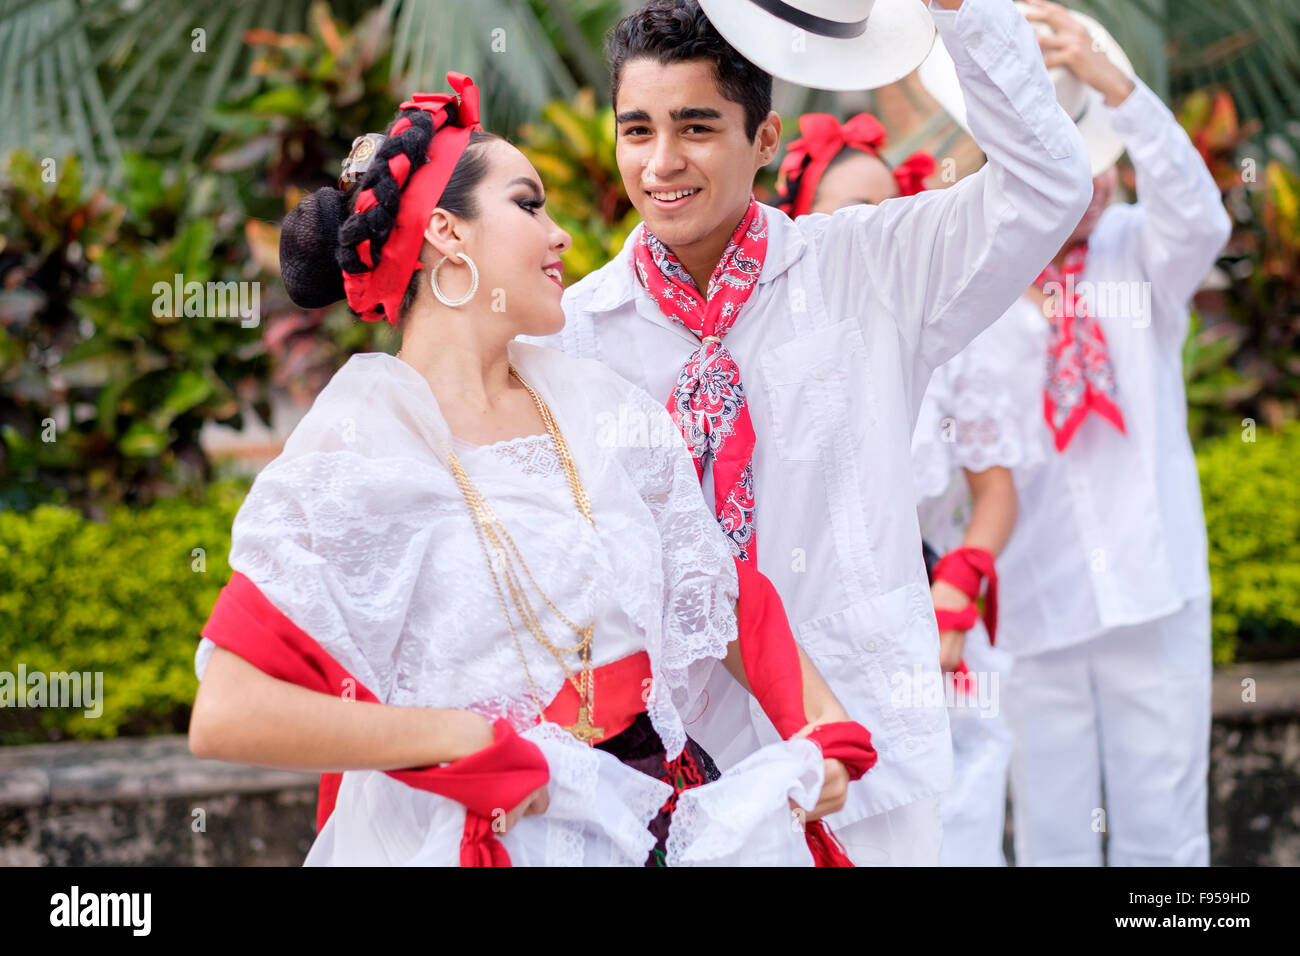 Young people in folkloristic costumes - Puerto Vallarta, Jalisco, Mexico. Xiutla Dancers - a folkloristic Mexican dance group in Stock Photo